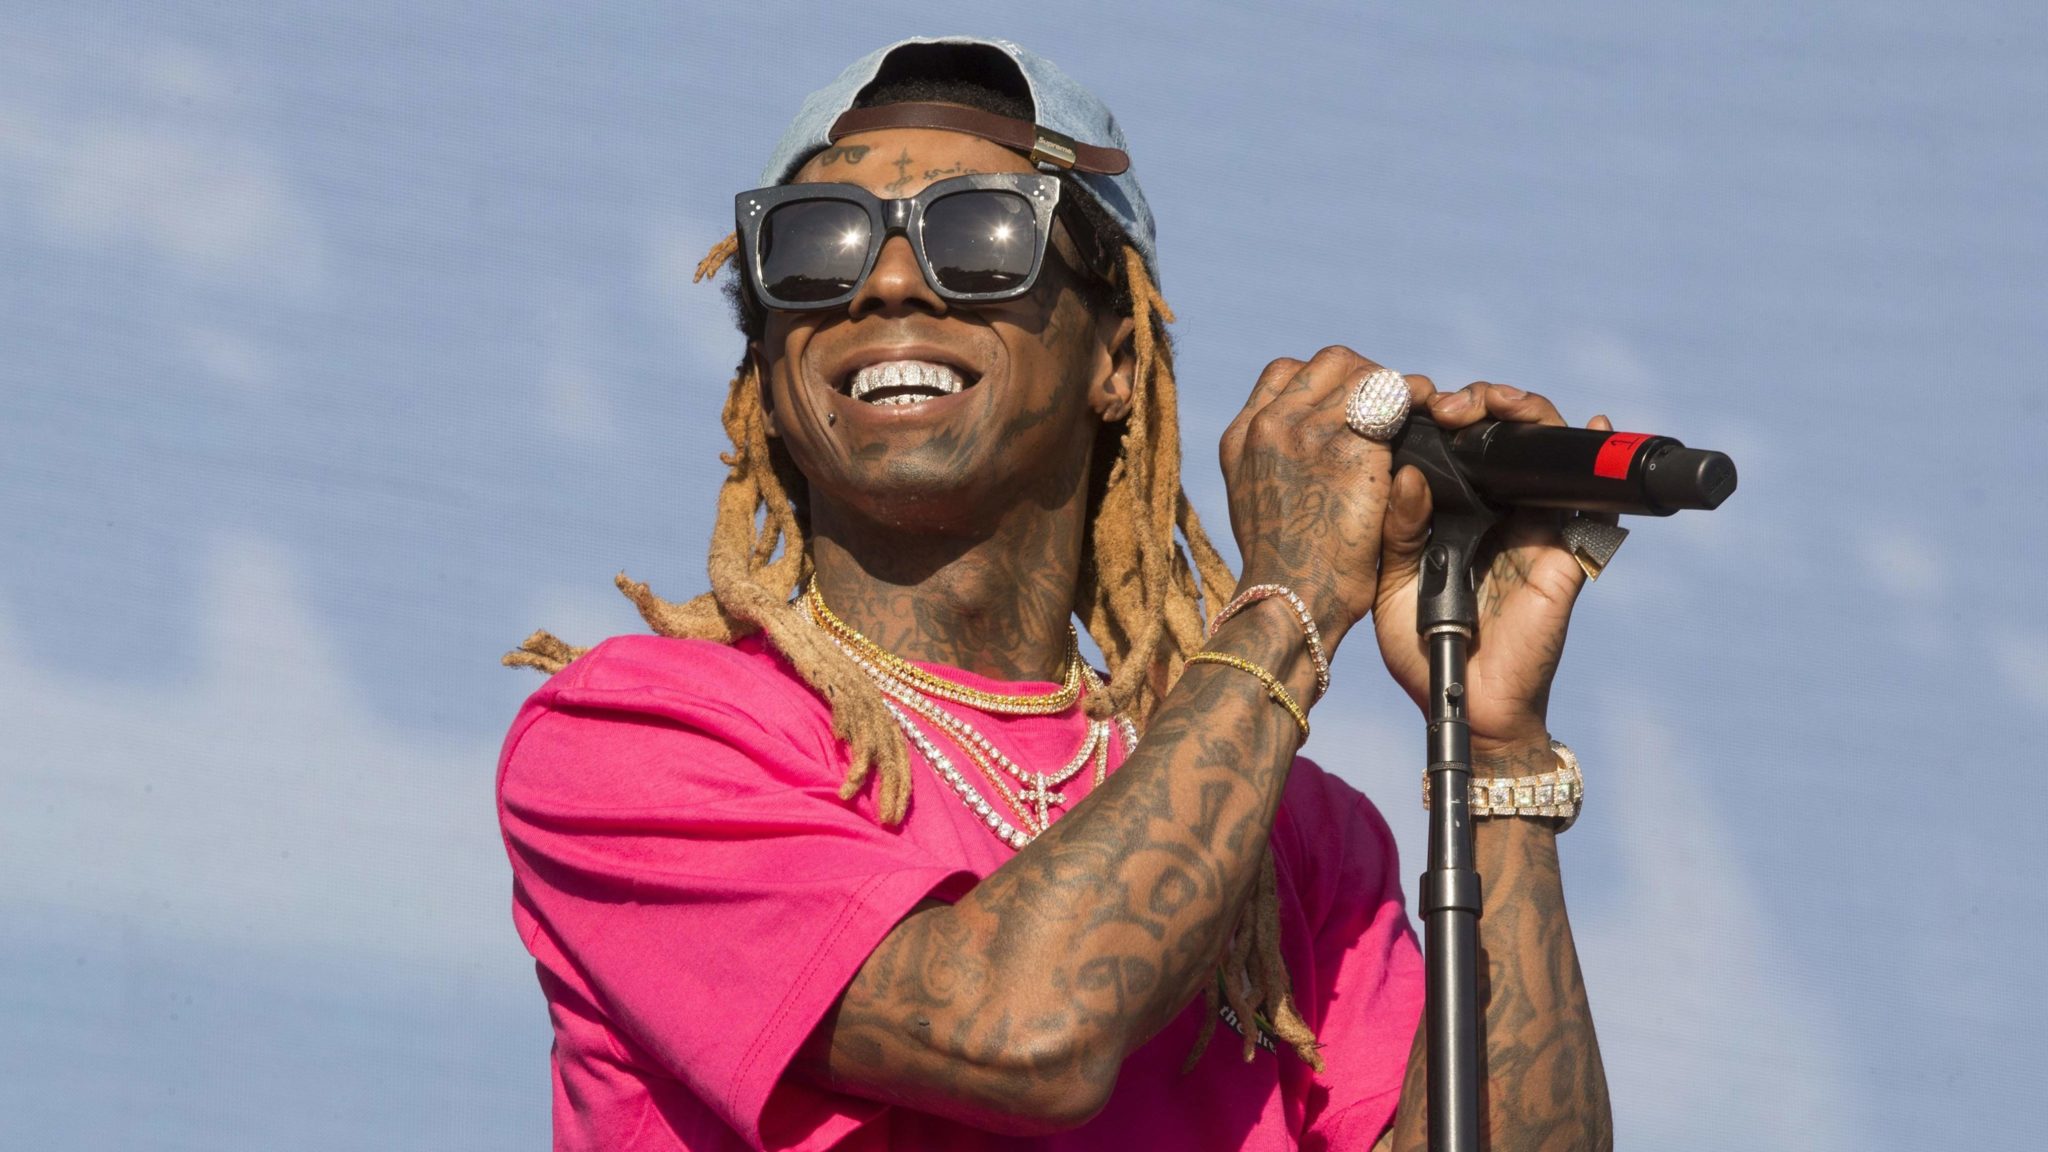 Feds Search Private Jet Lil Wayne Was On!!!